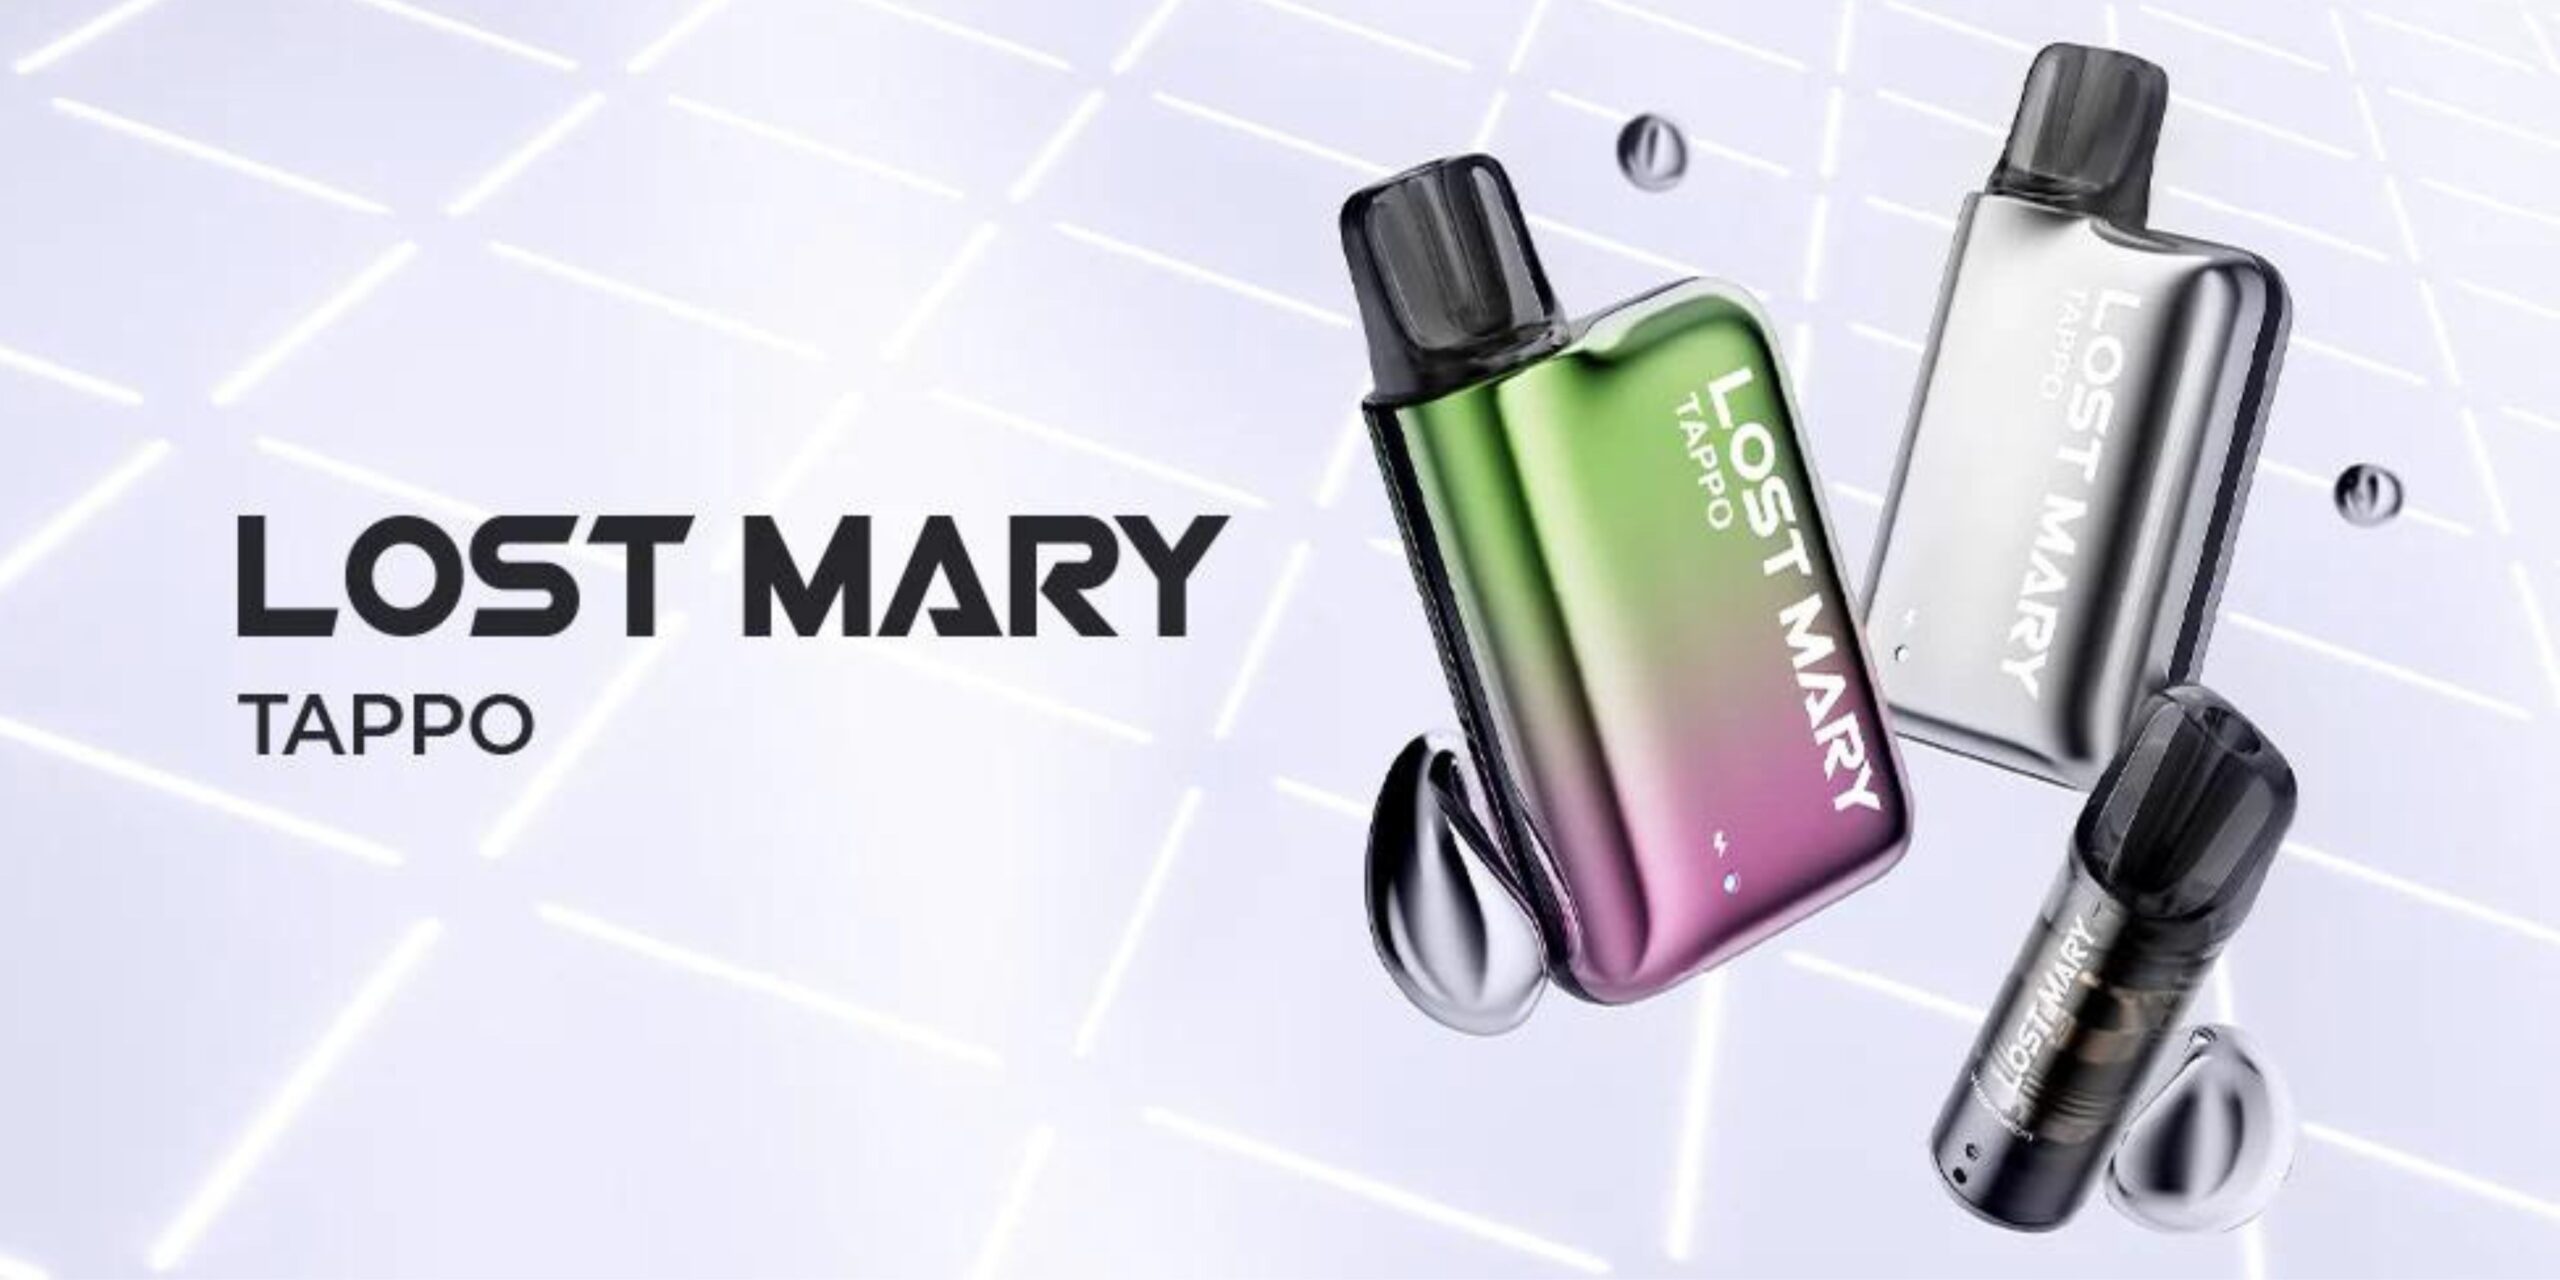 LOST MARY TAPPO – Lemon Lime (Replacement Prefilled Pods) VAPING - XMANIA Ireland 15